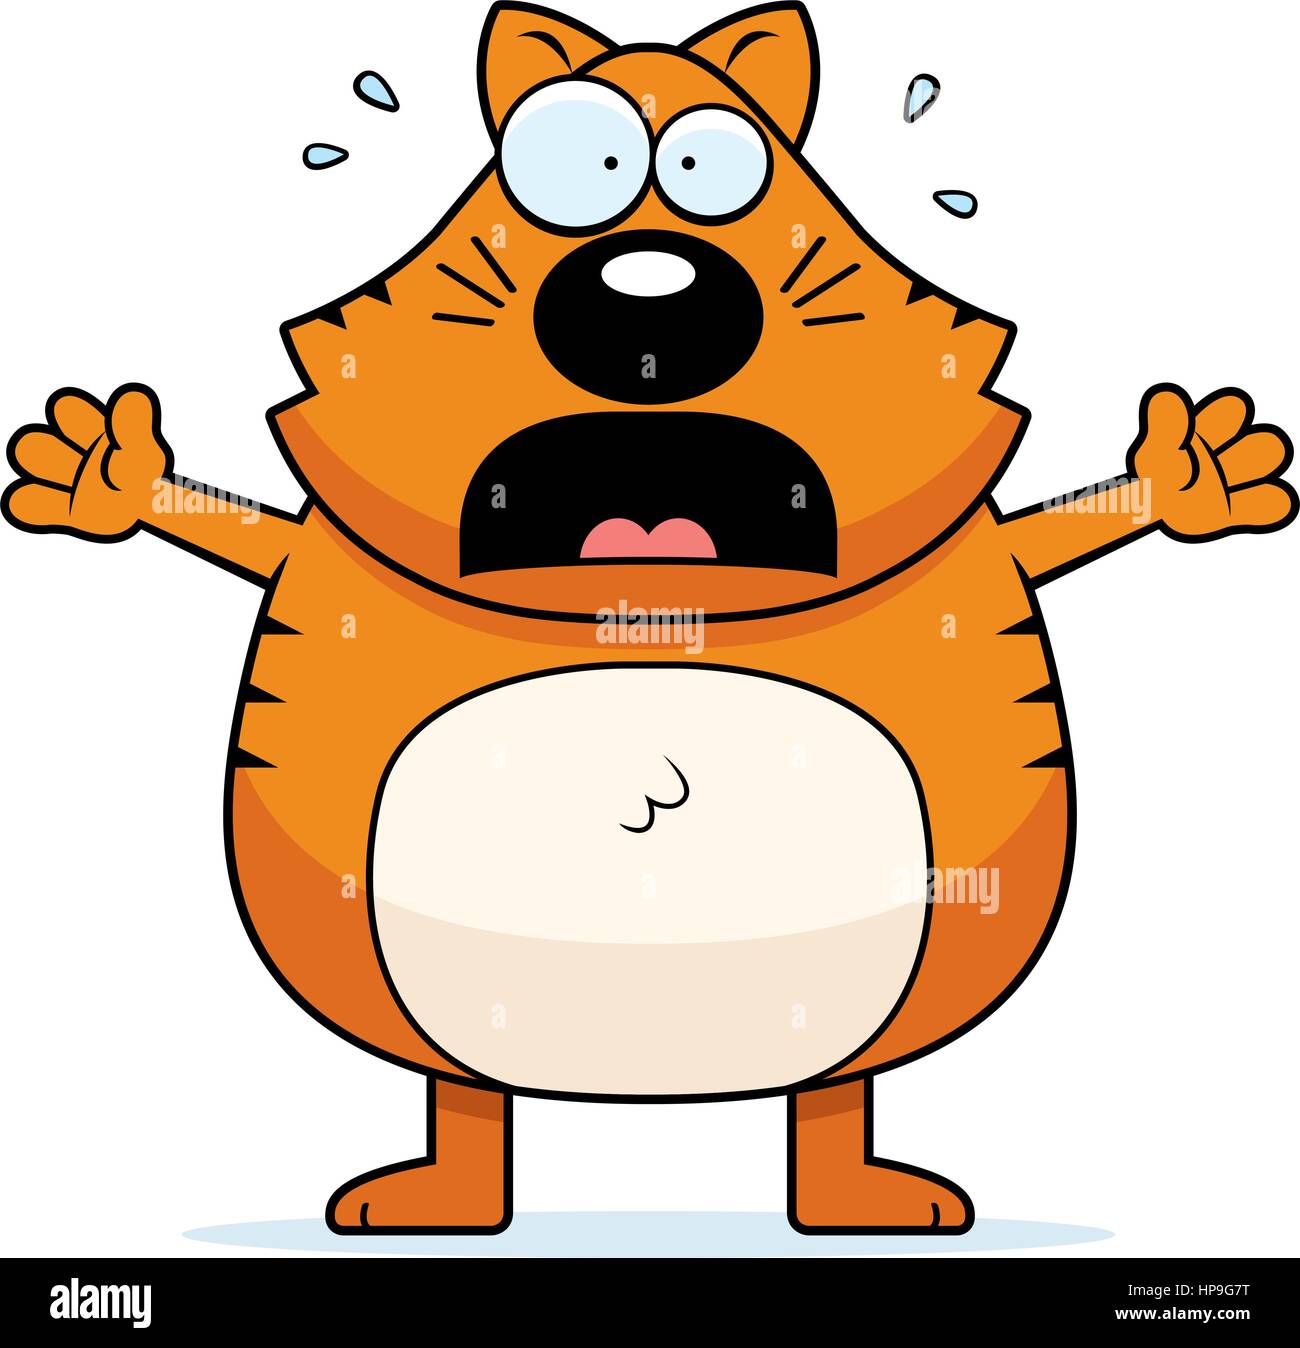 Scared Cats Stock Illustrations – 306 Scared Cats Stock Illustrations,  Vectors & Clipart - Dreamstime